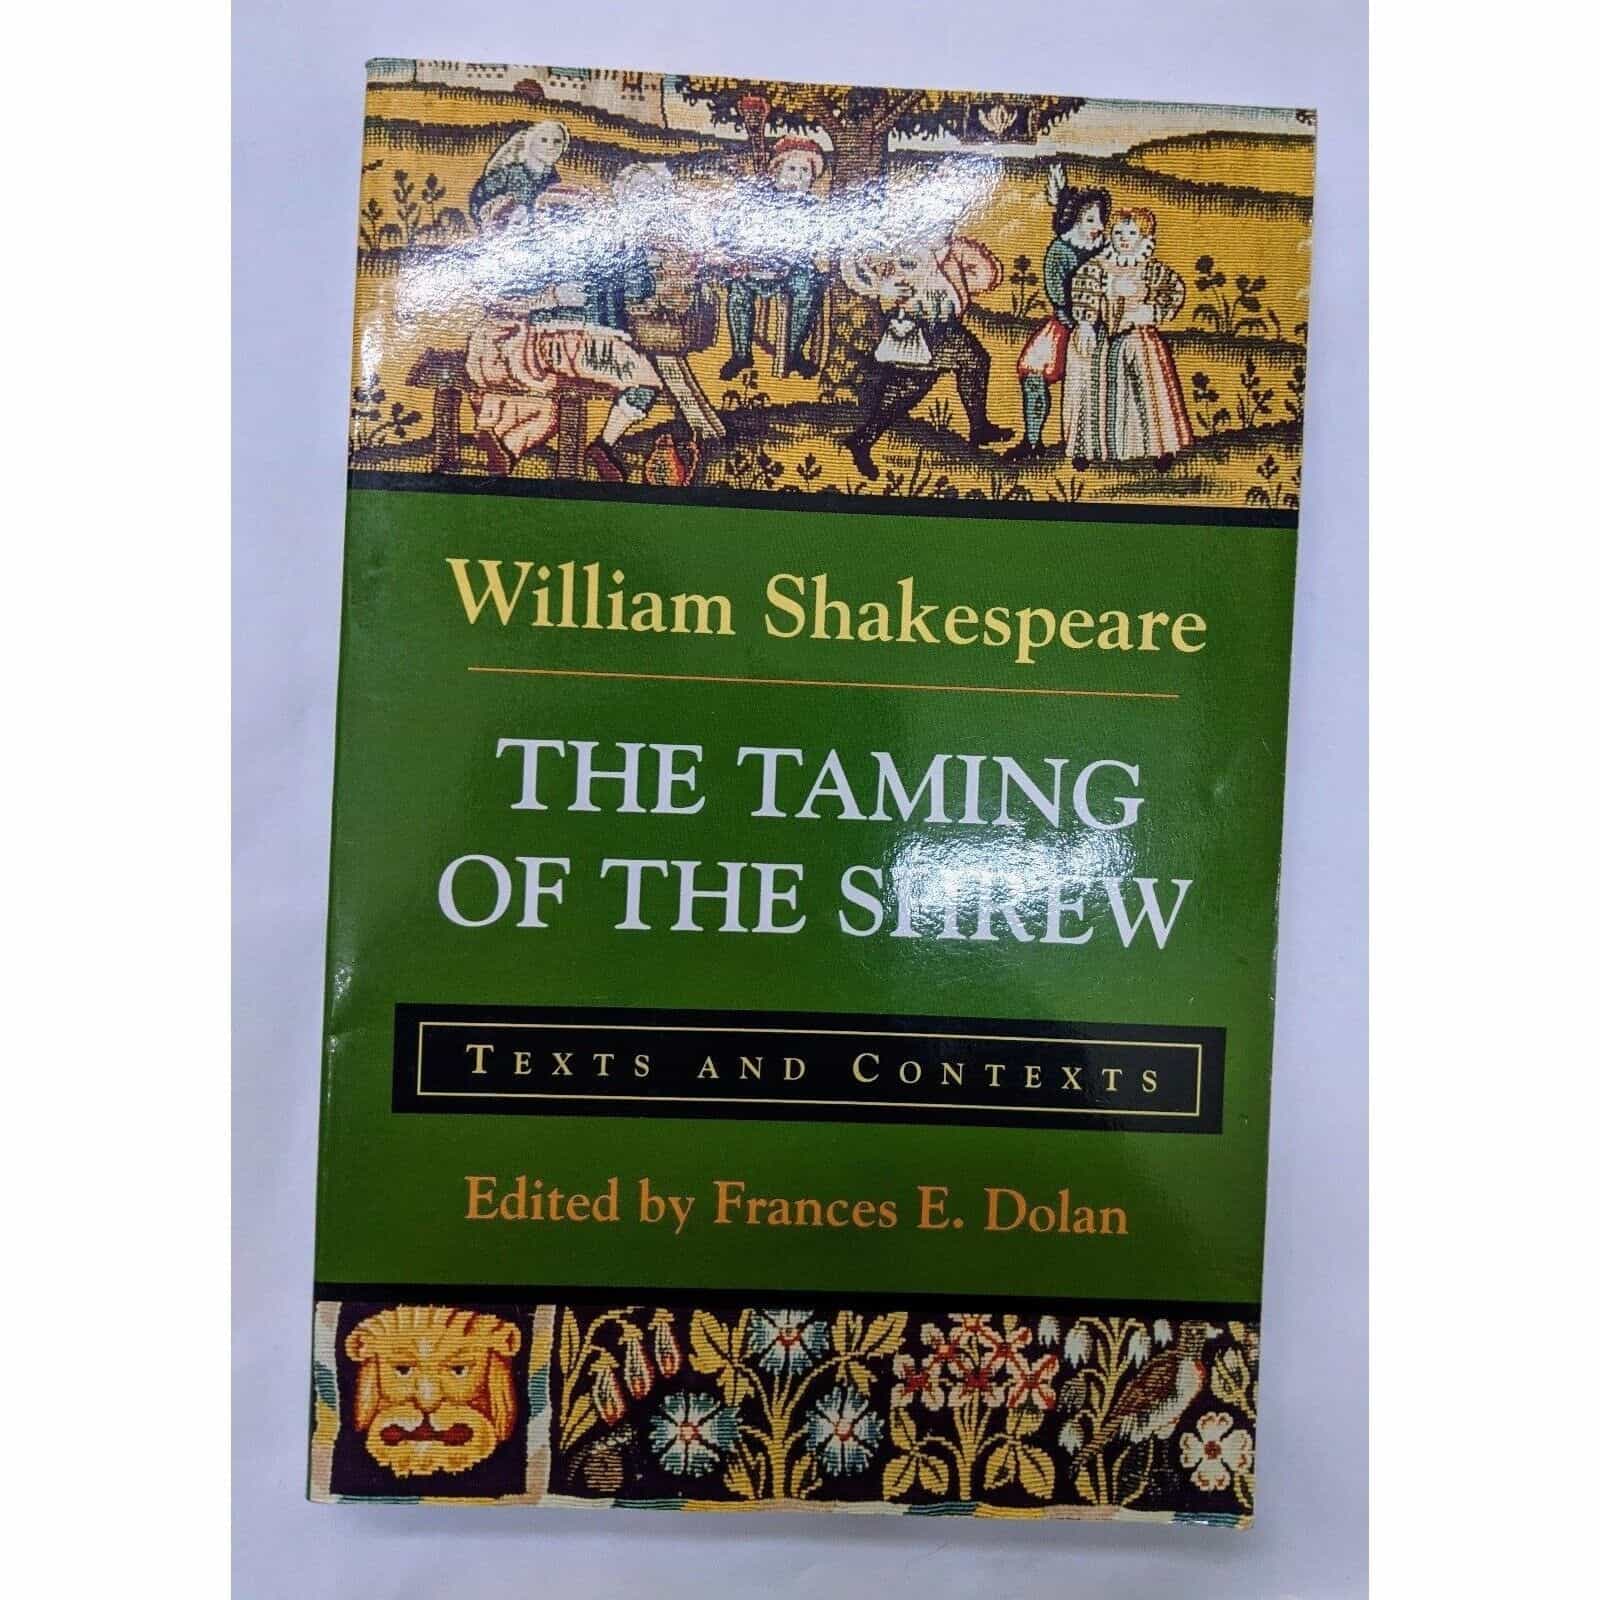 The　The　edited　by　Dolan　Frances　E.　Taming　Of　by　Shakespeare　Shrew　William　Book